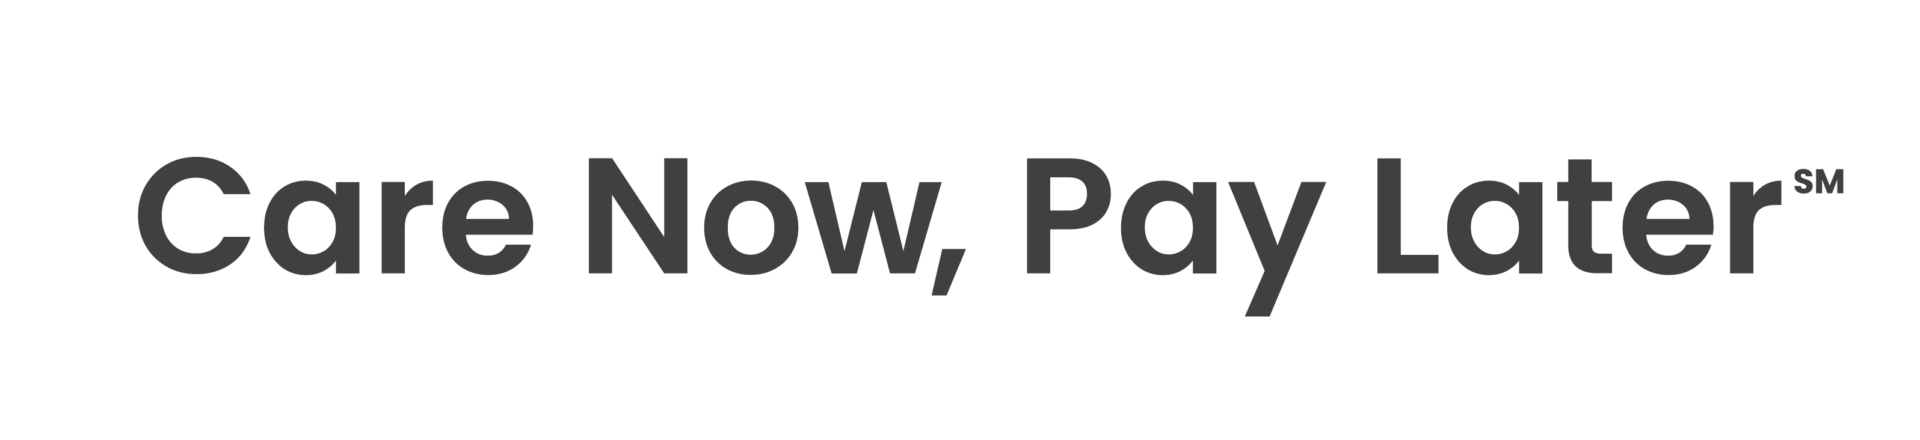 Care Now, Pay Later logo final